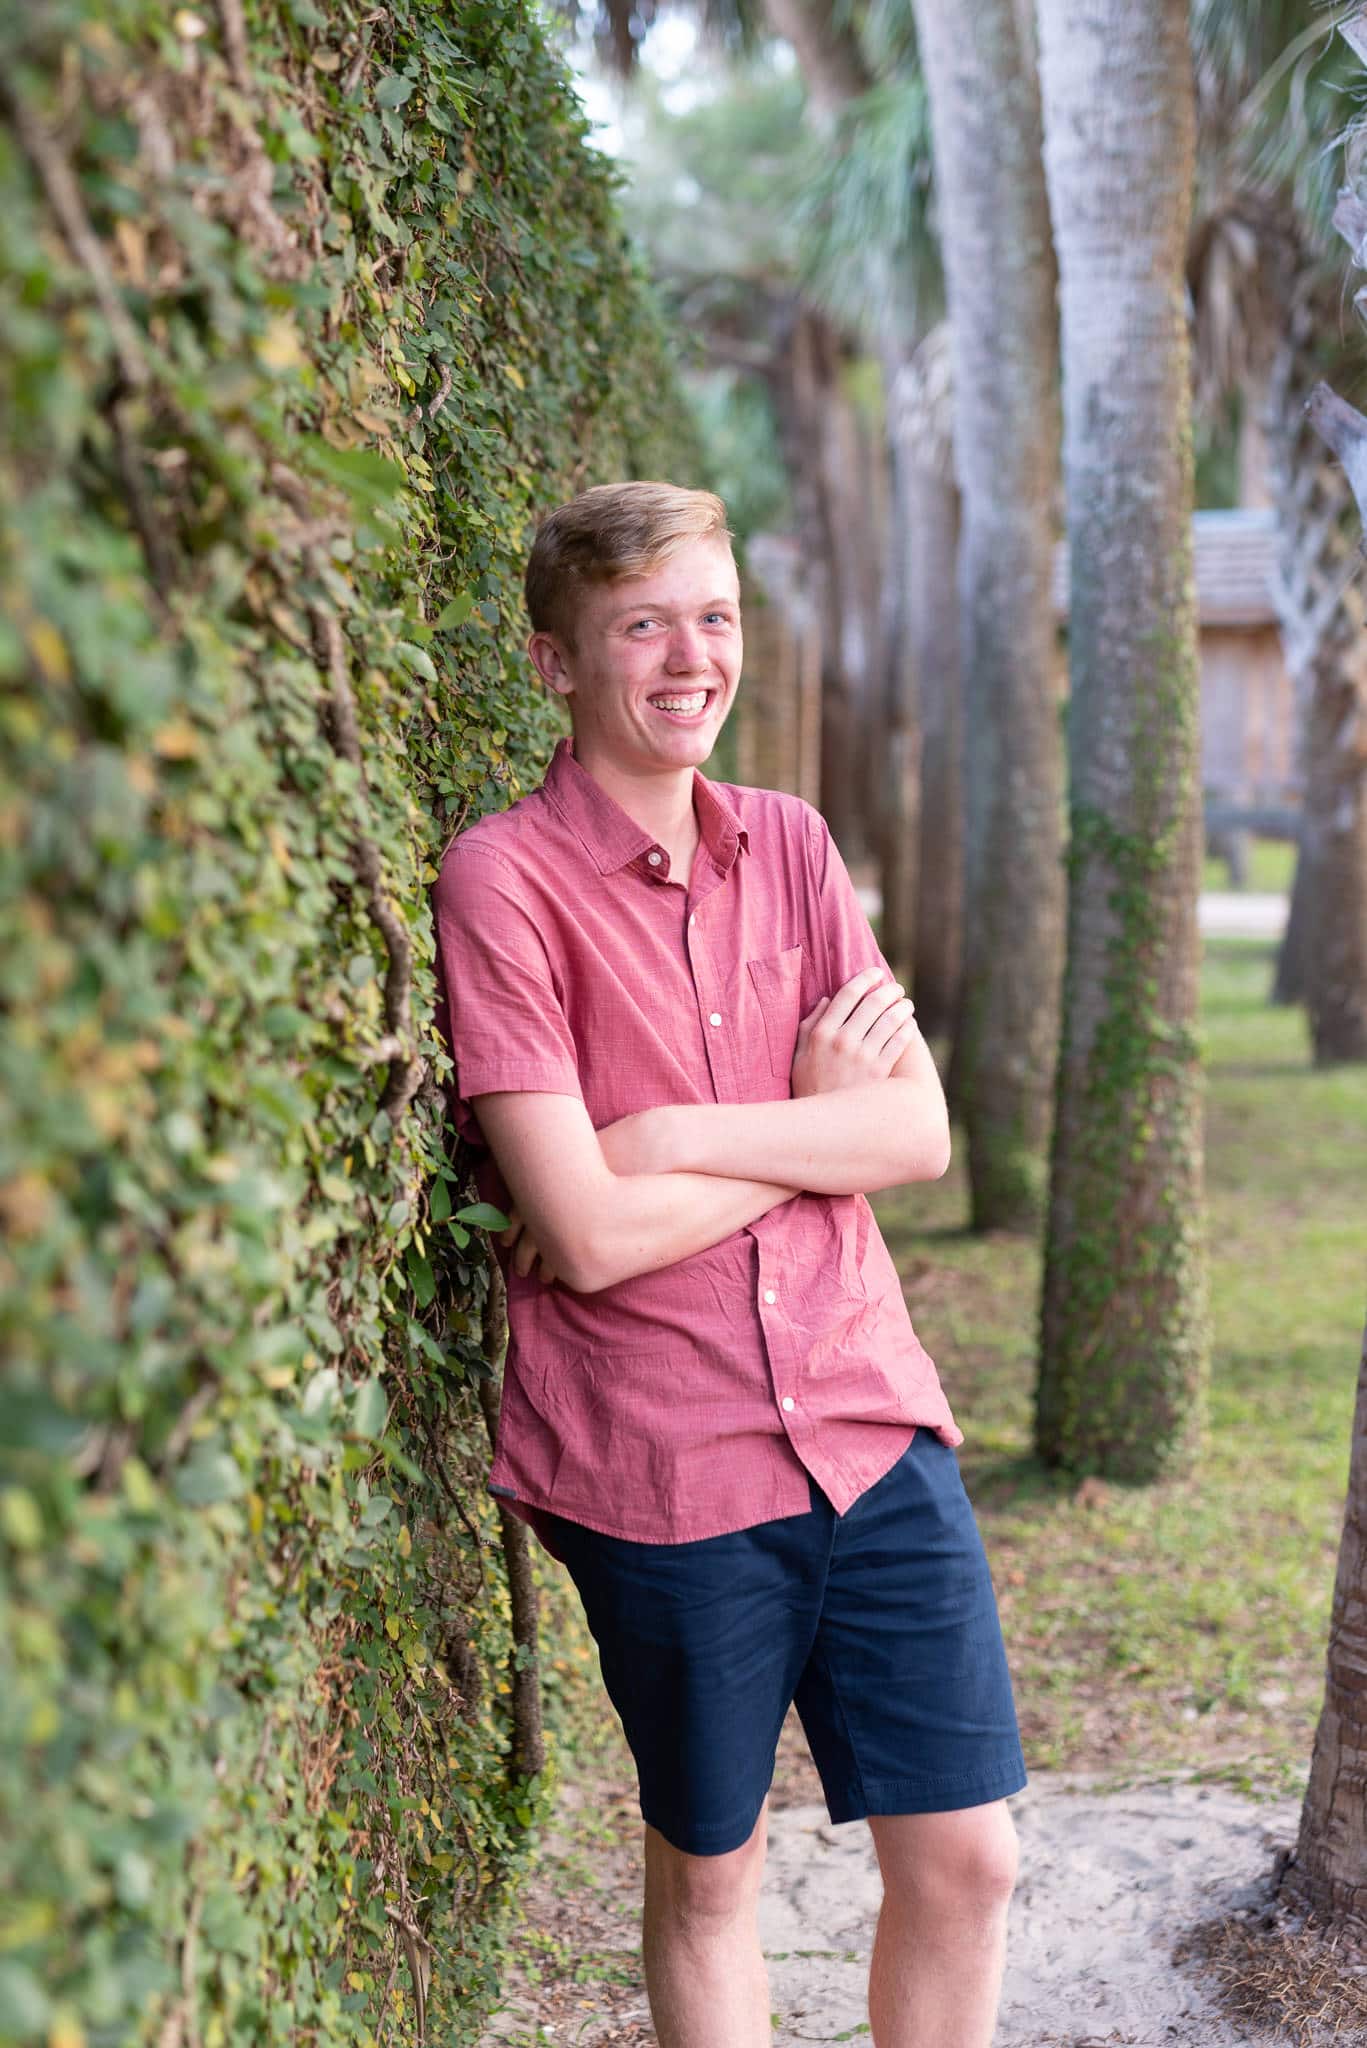 Portraits by the ivy covered wall of the Atalaya Castle - Huntington Beach State Park